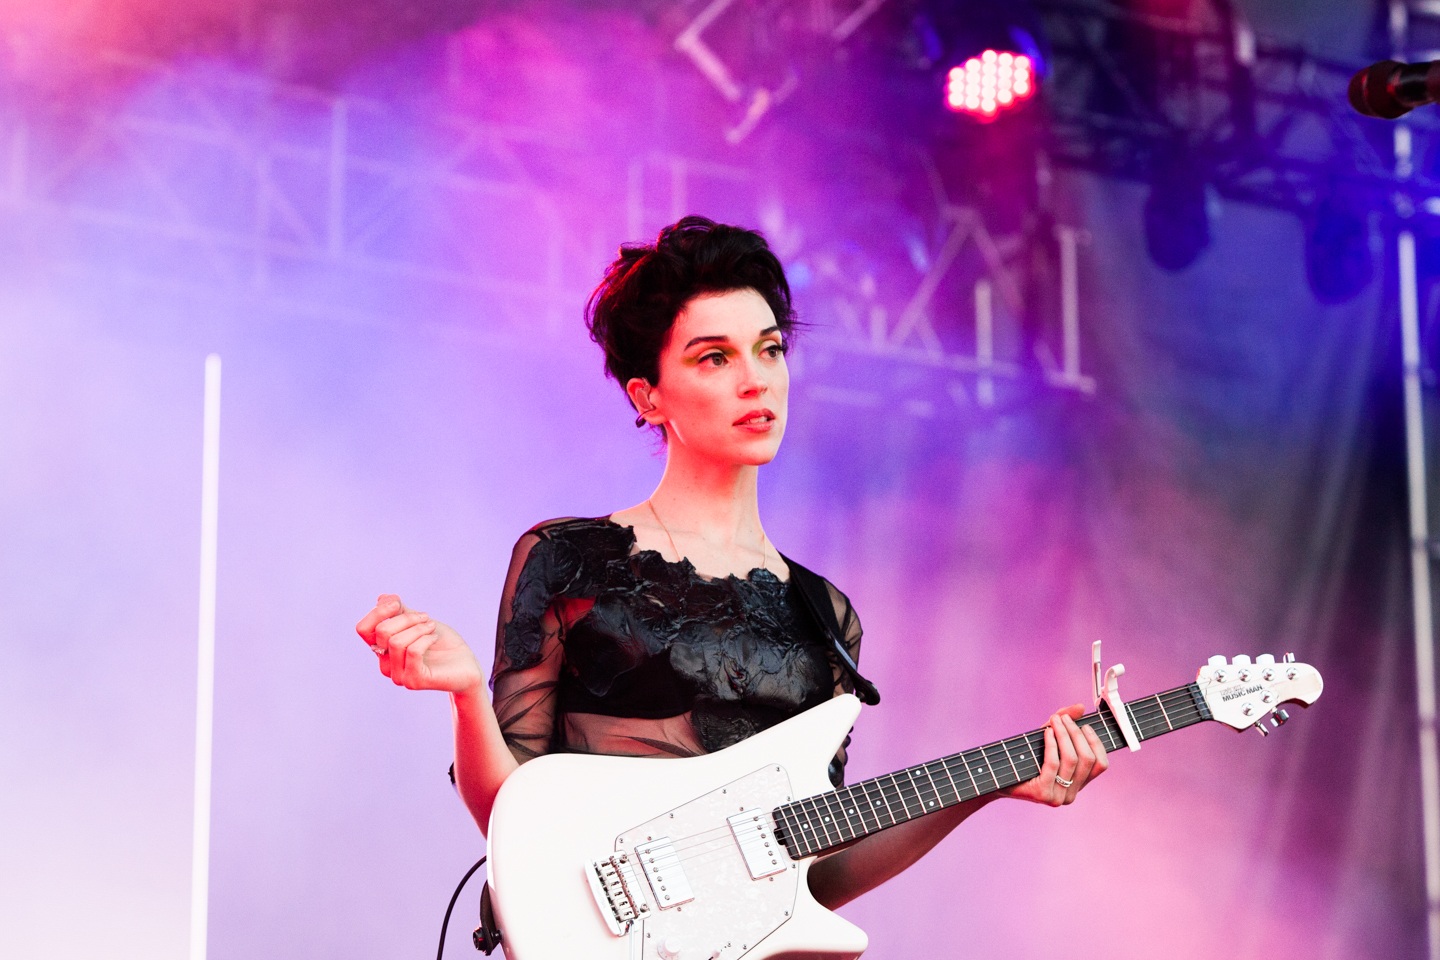 38 Photos That Prove This Year’s Governors Ball Was The Best Yet